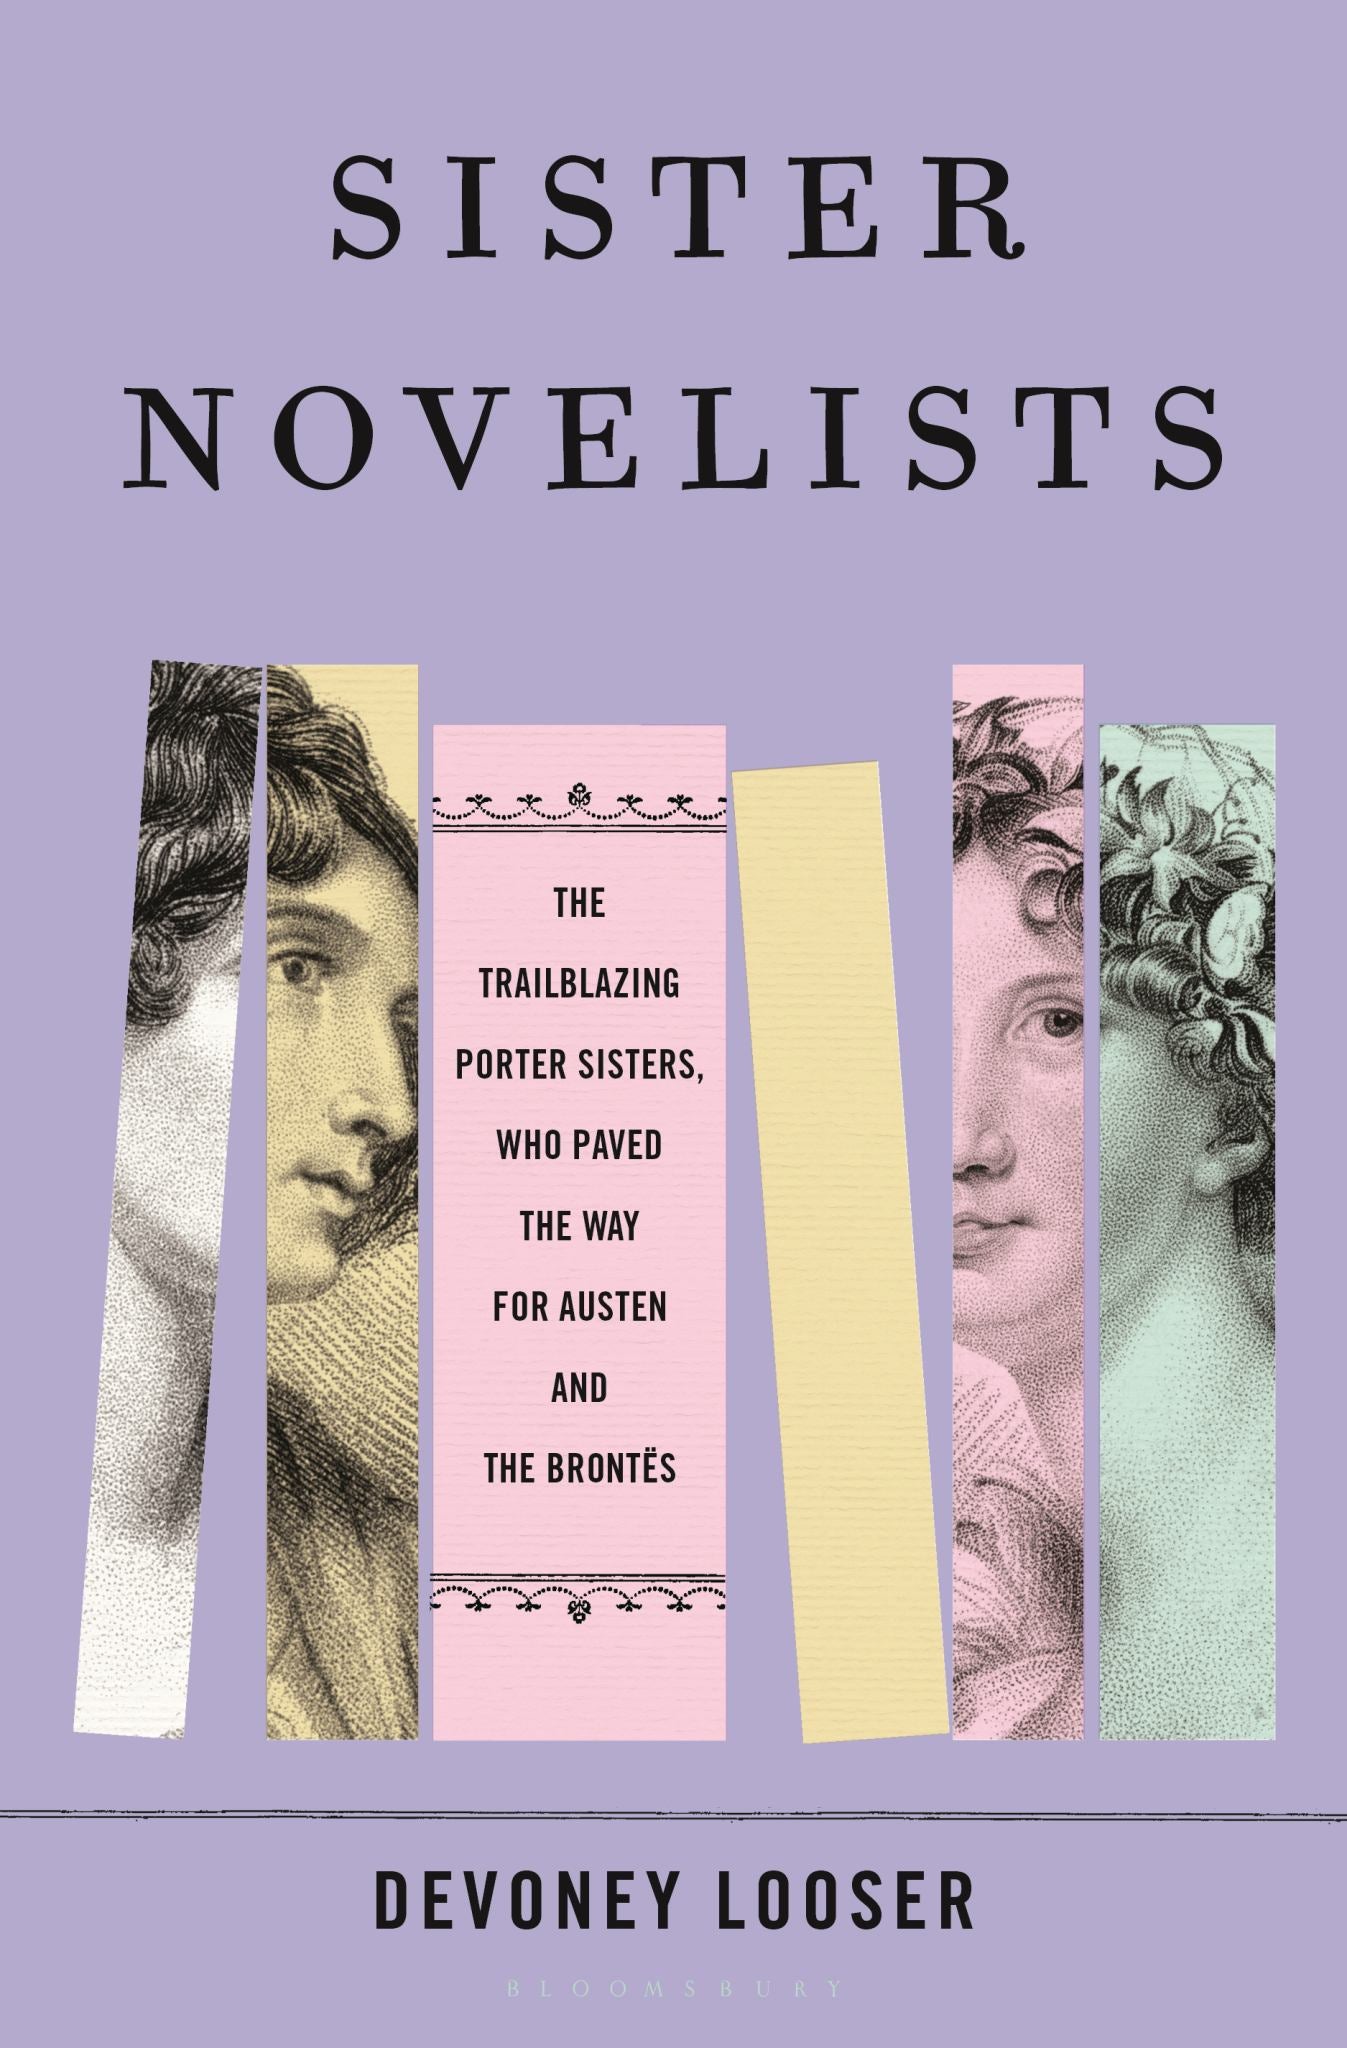 Sister Novelists: Trailblazing Porter Sisters, Who Paved The Way For Austen And The Brontës